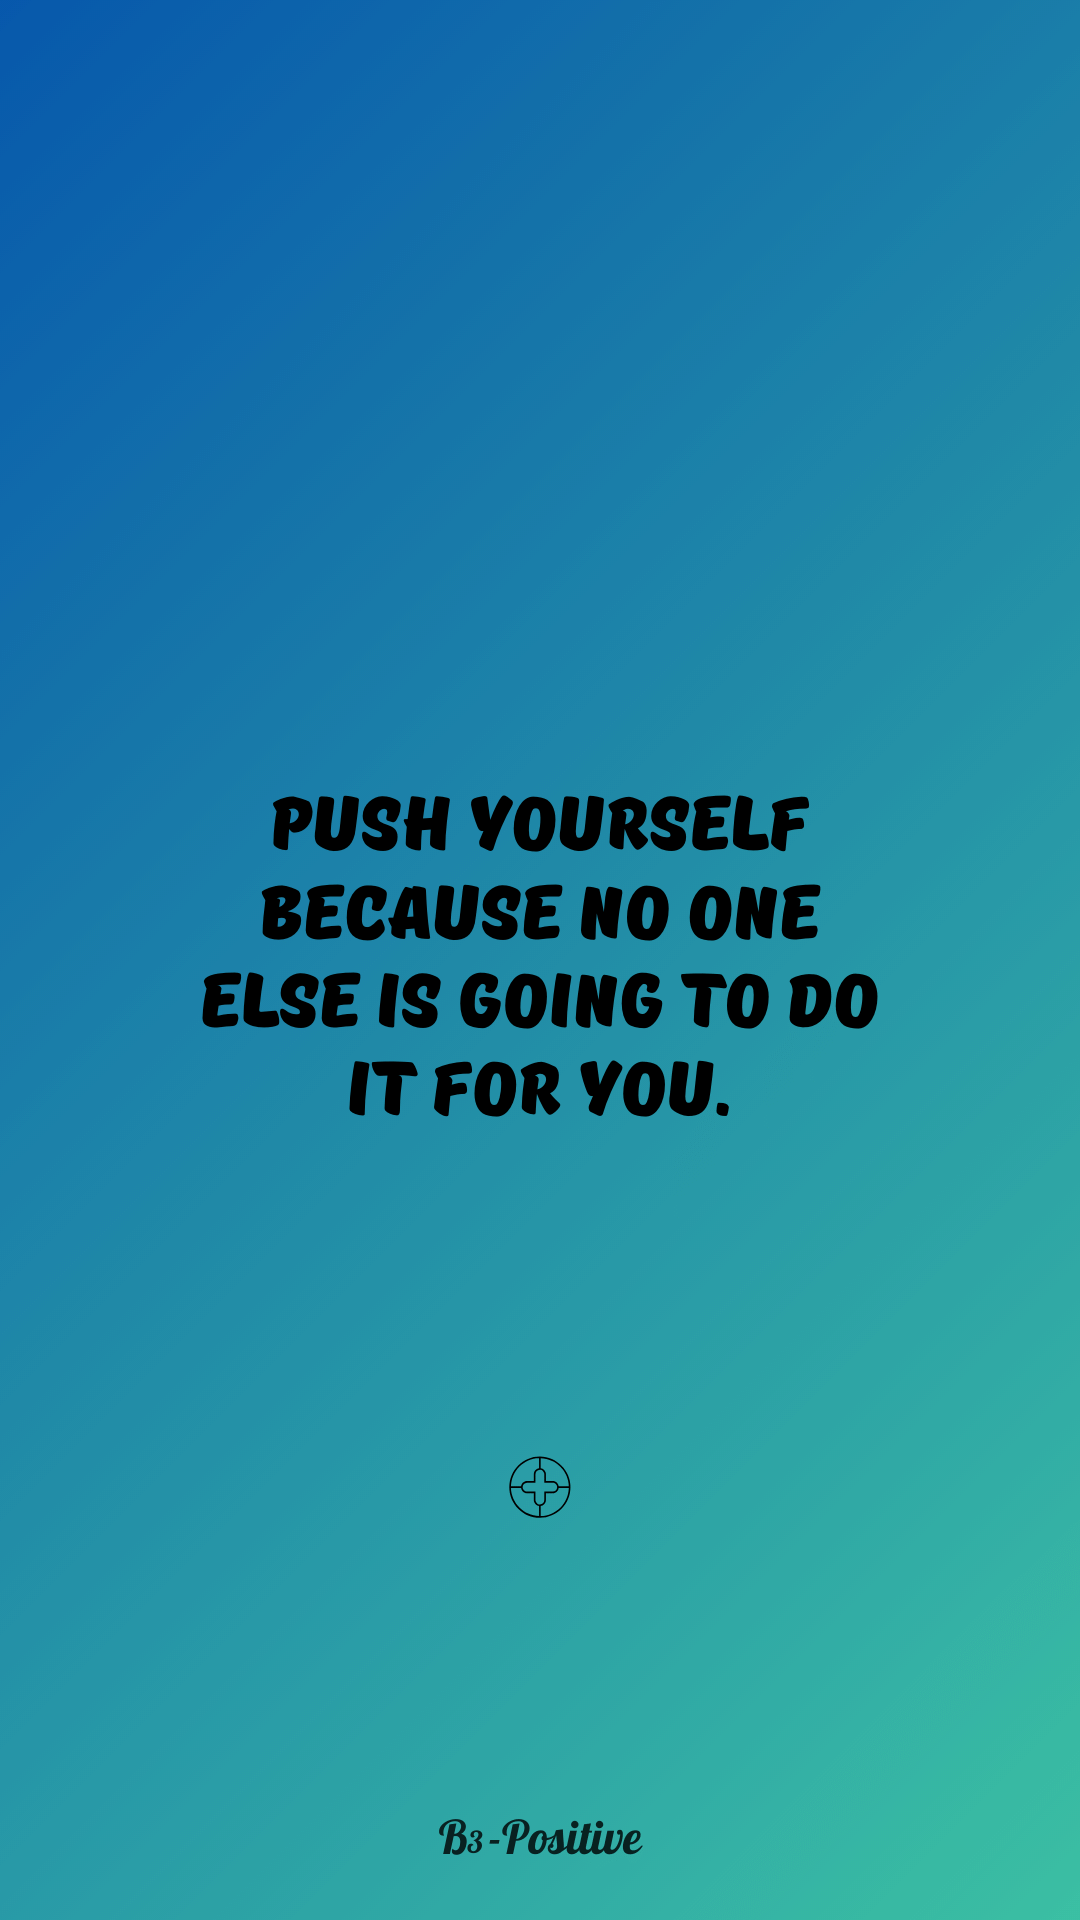 Fitness Quotes + Wallpaper for Phone to Download [2020]. Inspirational quotes wallpaper, Motivational quotes wallpaper, Fitness quotes